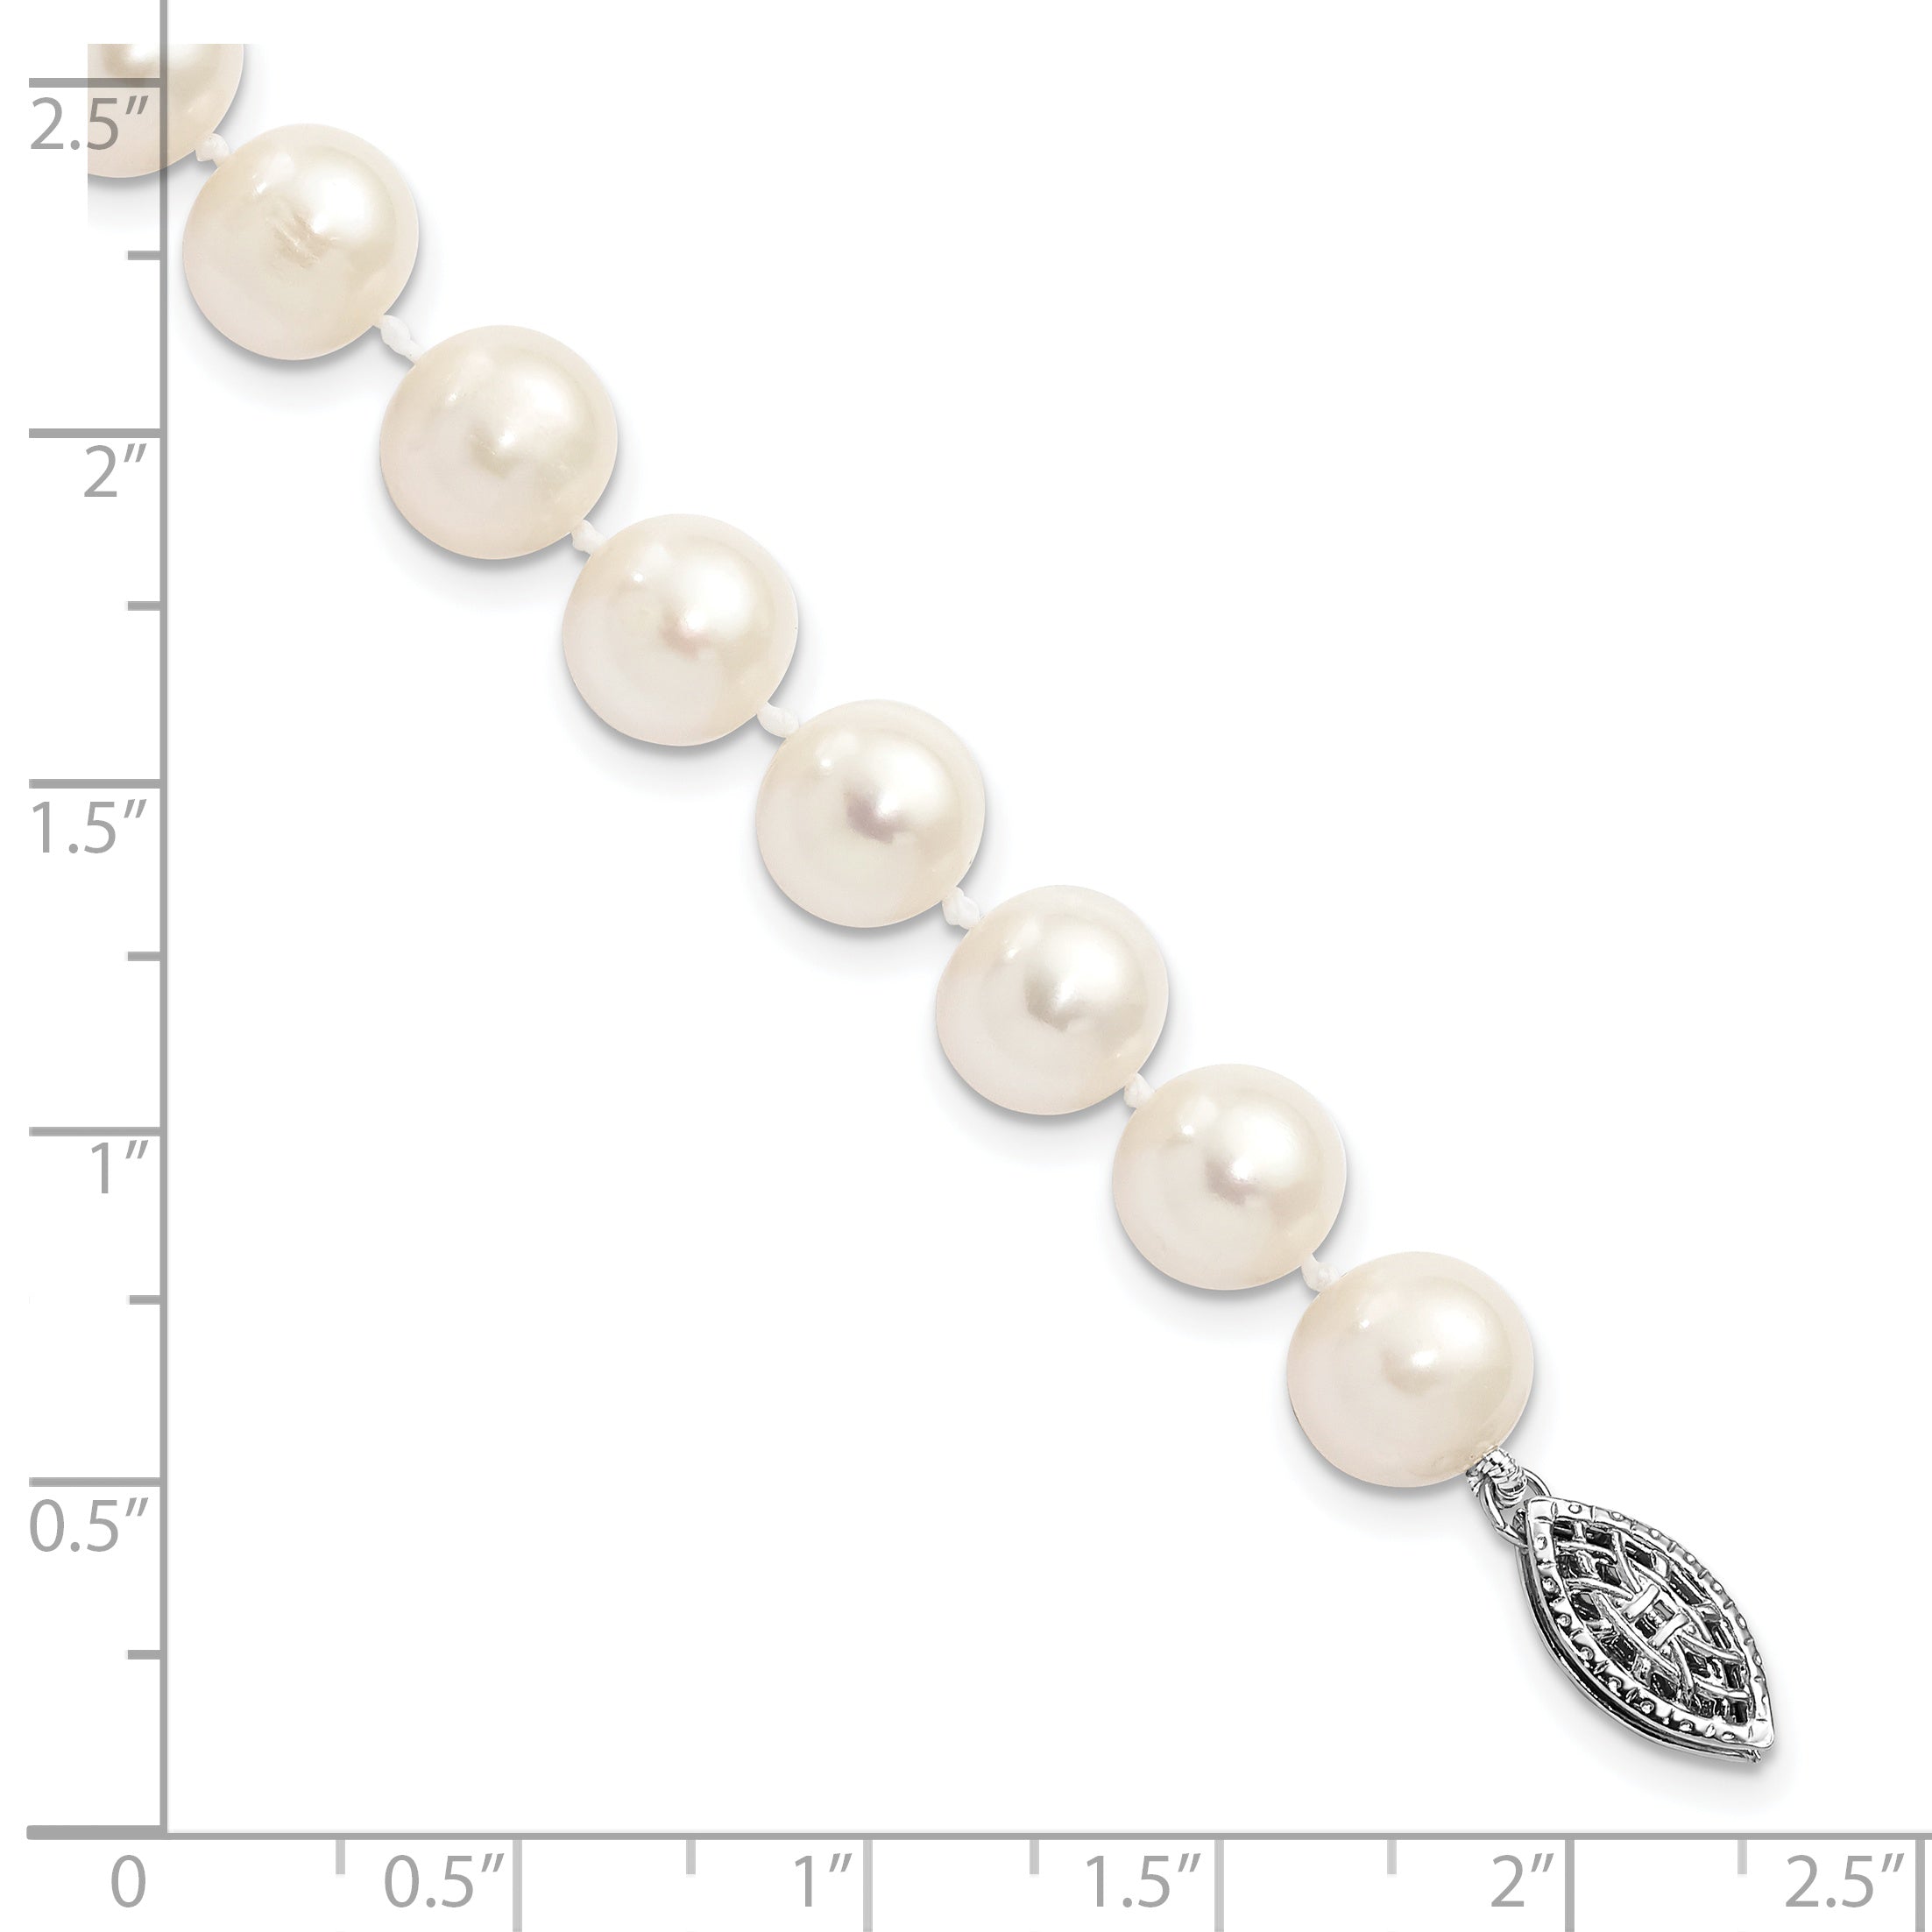 Sterling Silver Rhodium 8-9mm White Freshwater Cultured Pearl Bracelet